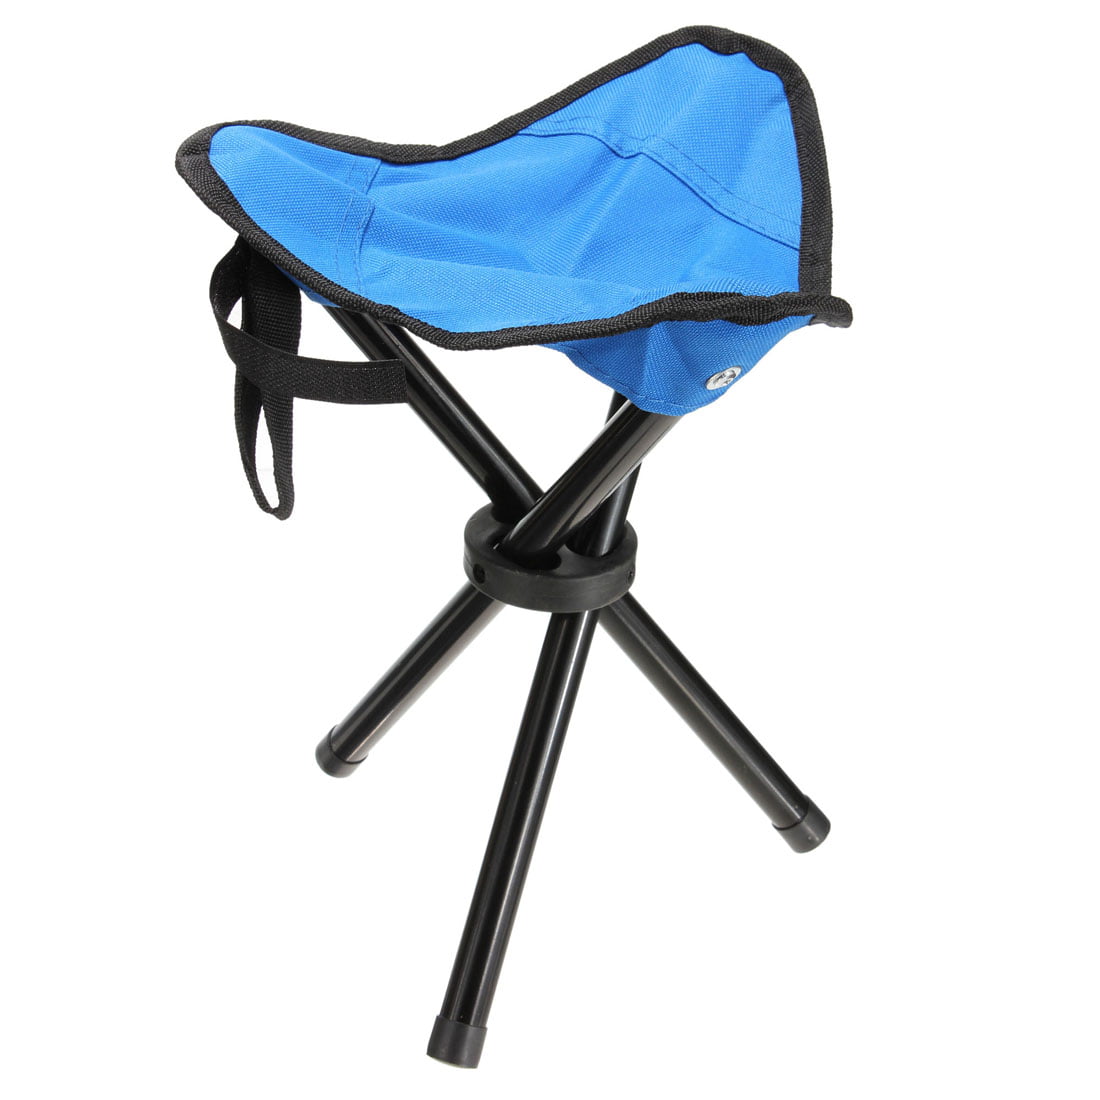 Folding Toilet Portable Chair Camping Travel Festival Park Fishing Outdoors Seat 